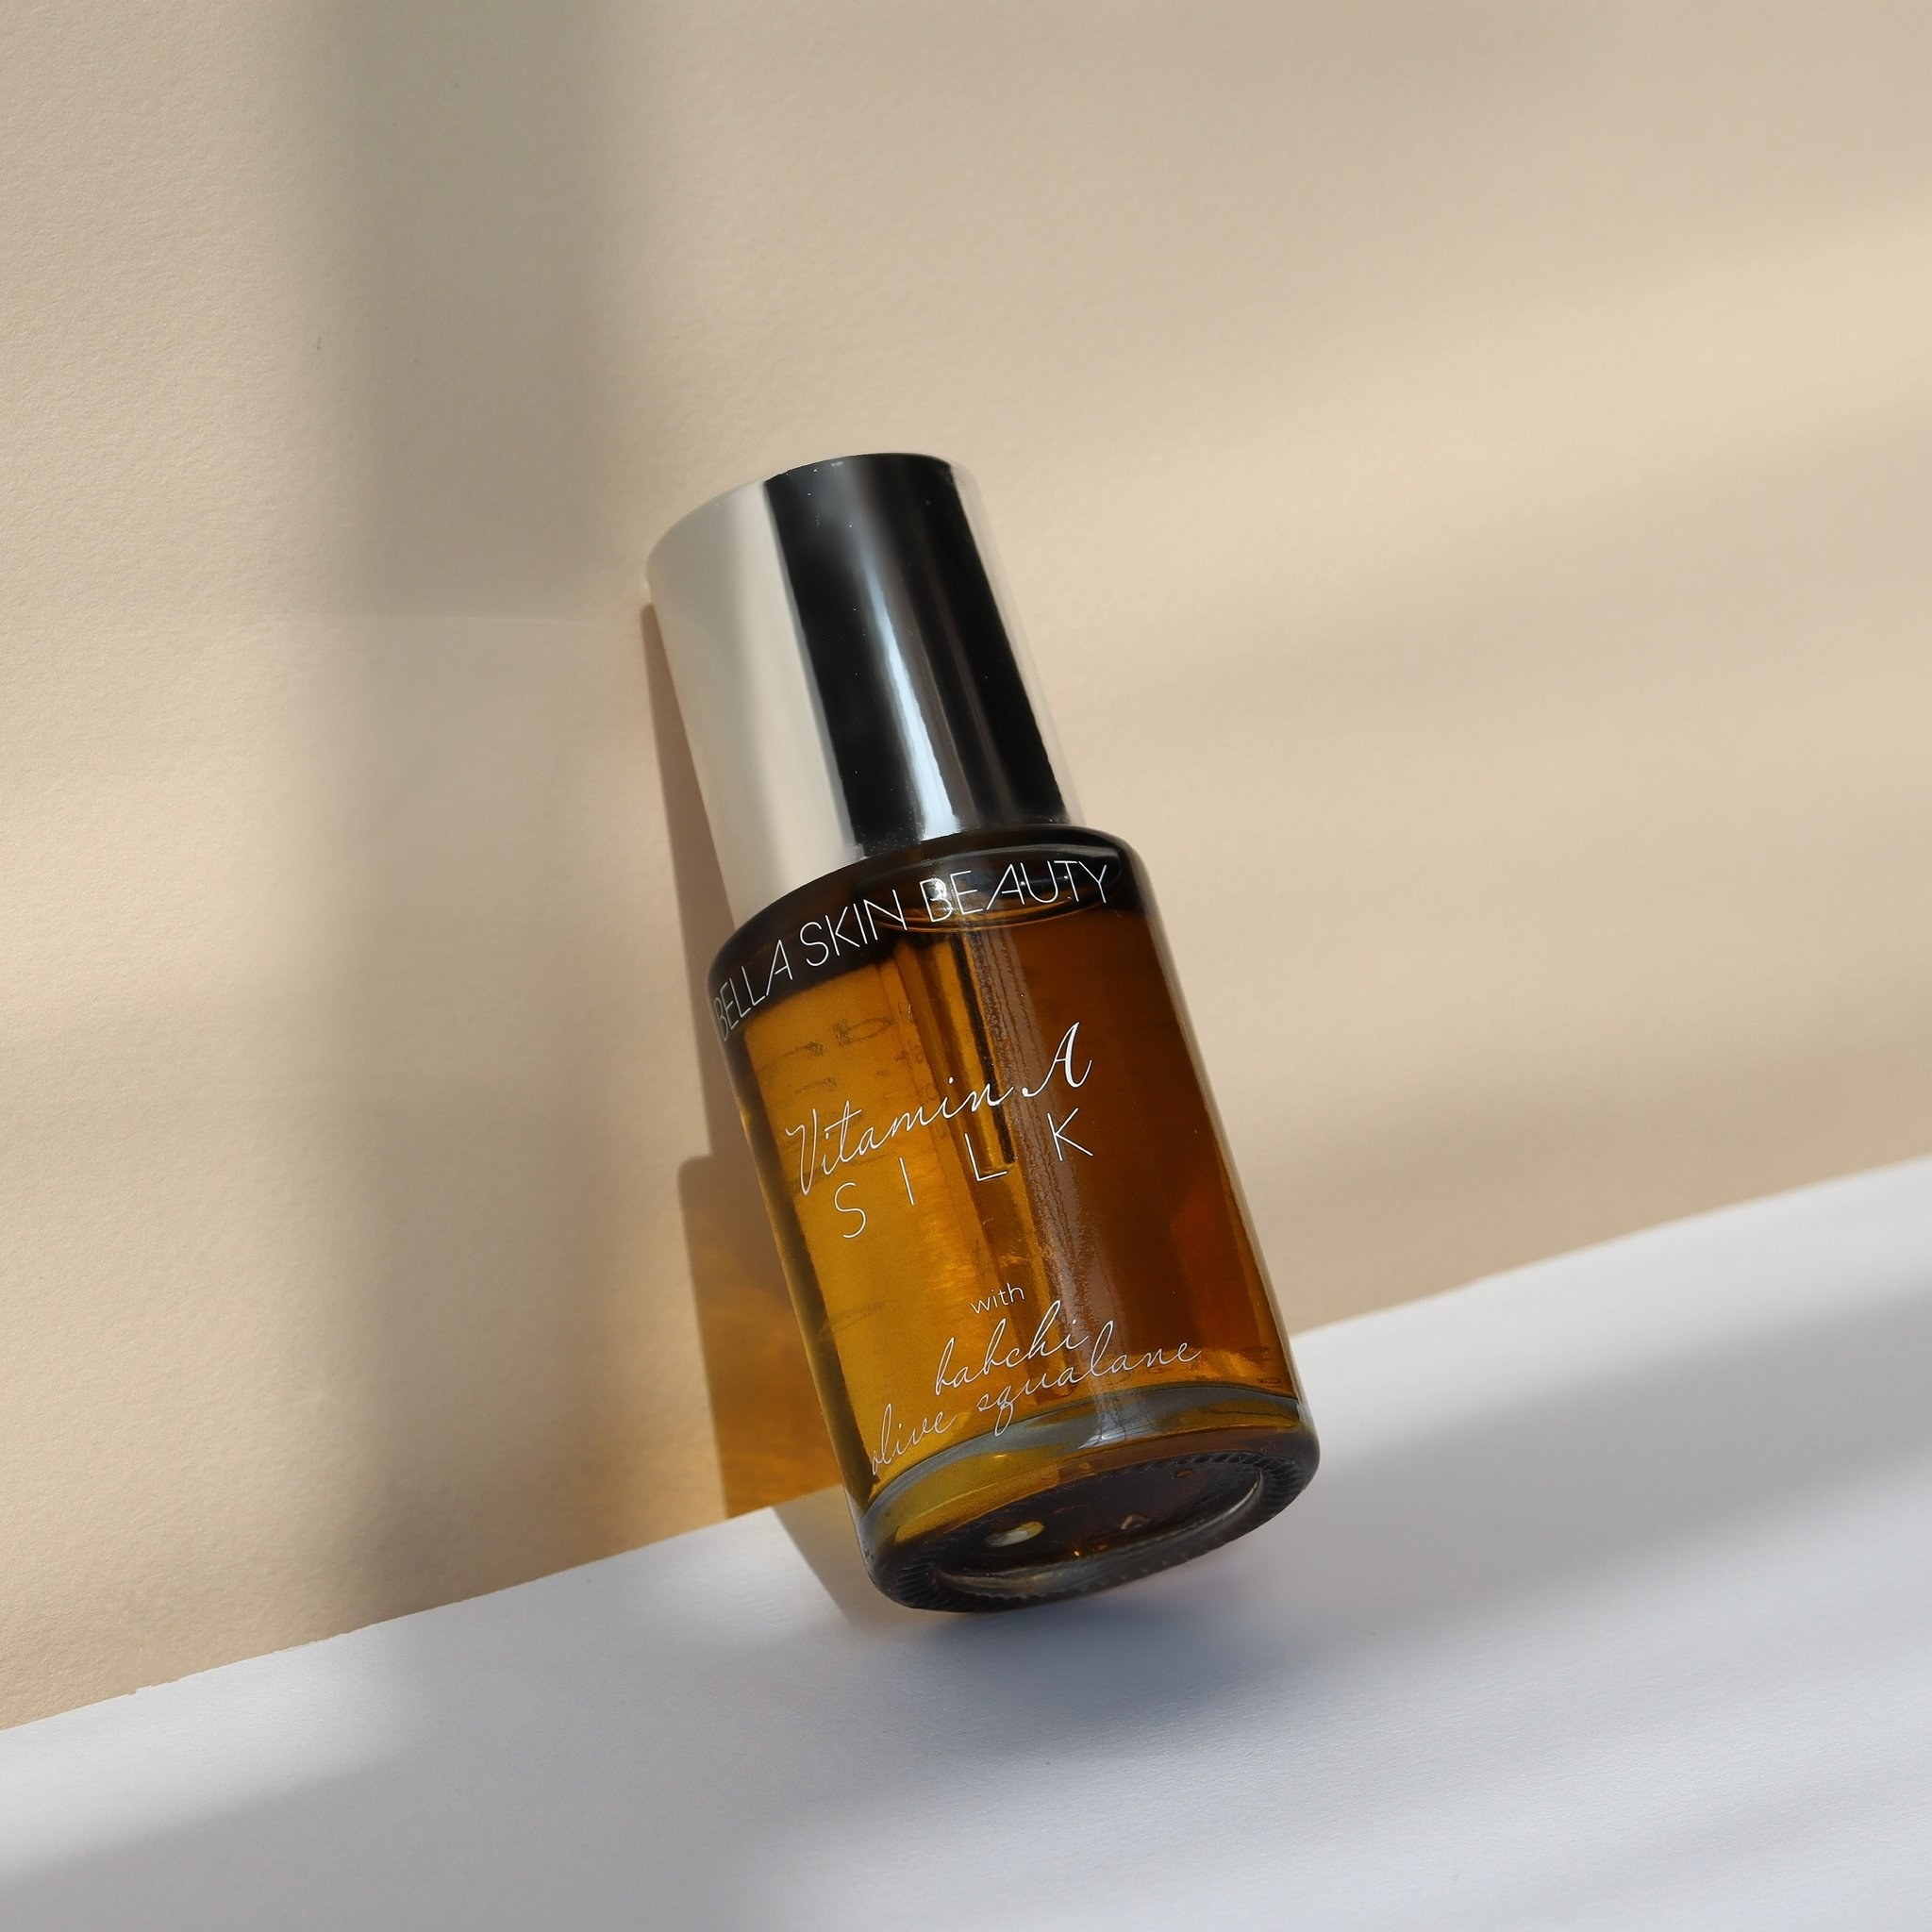 The Vitamin A Silk Night Face Oil bottle leaning against a wall for display